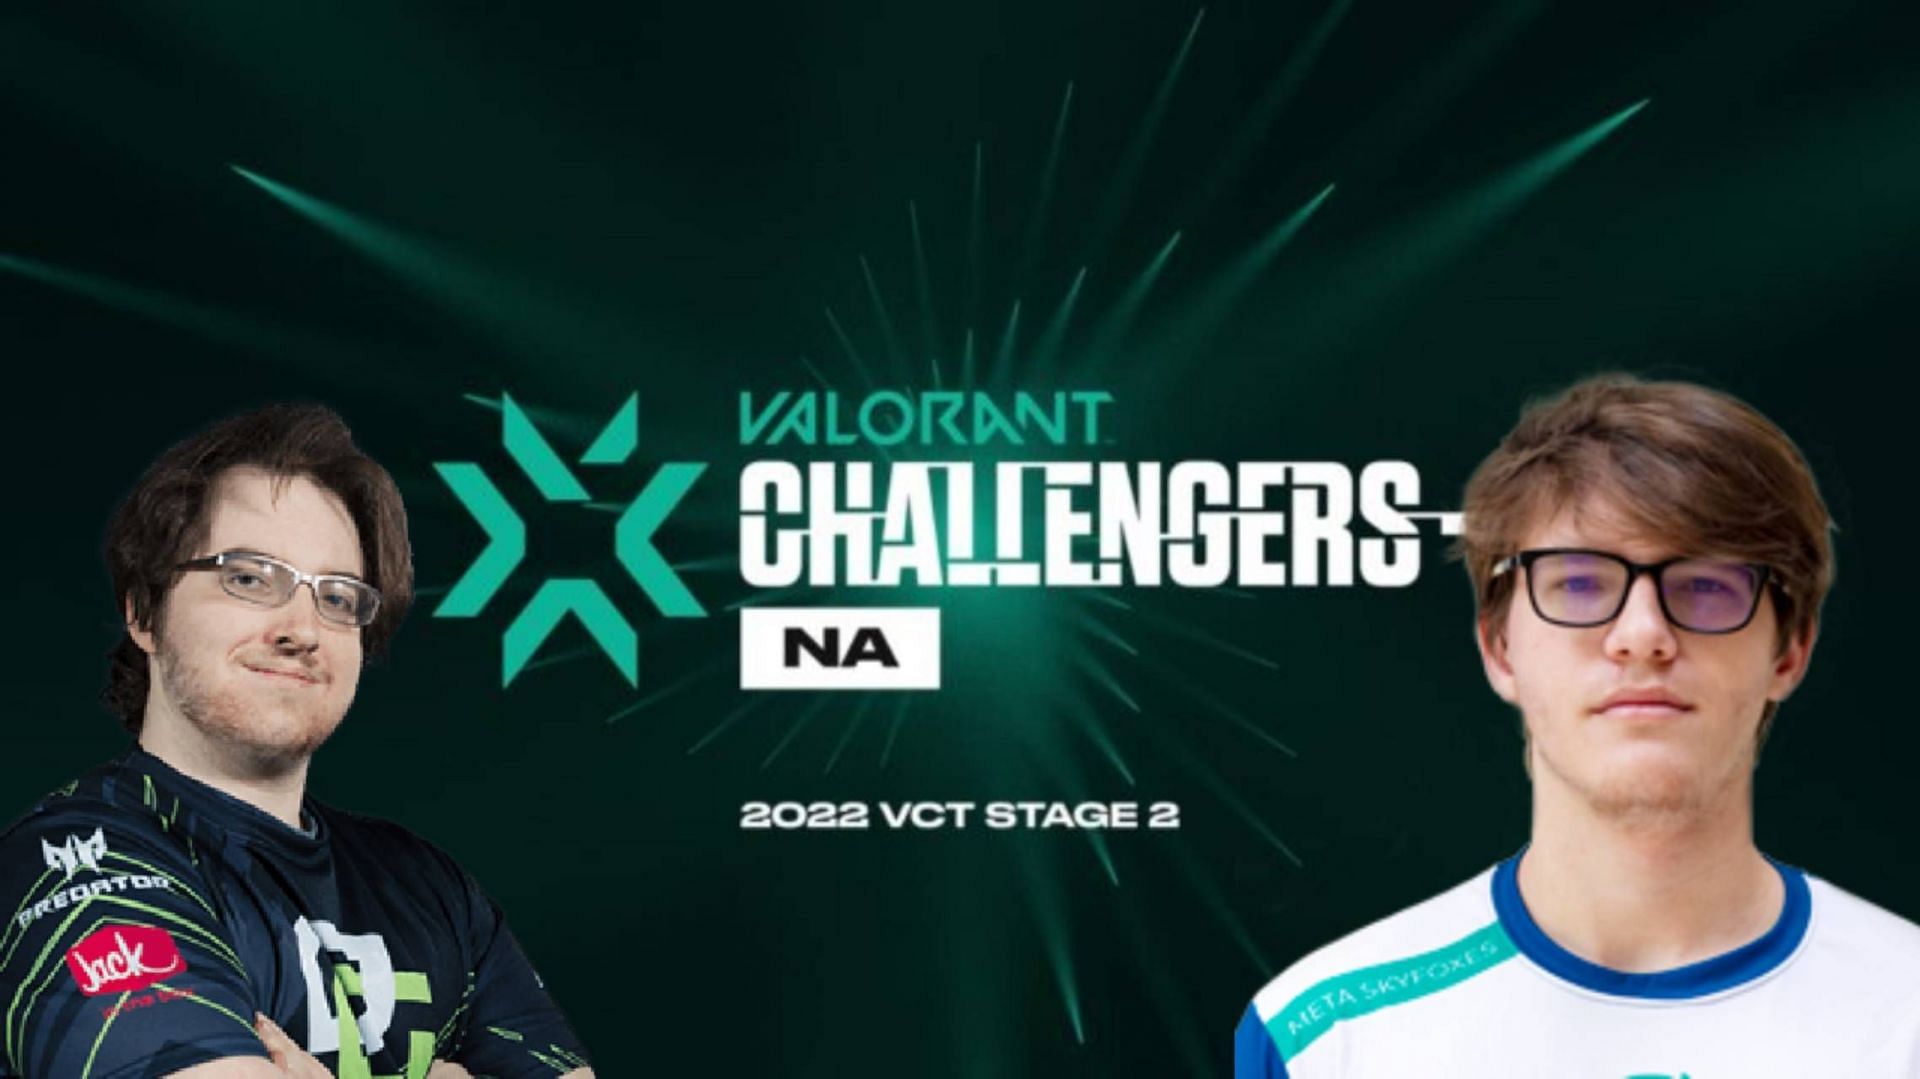 OpTic and EG will battle it out in the VCT NA Stage 2 Challengers (Image via Sportskeeda)